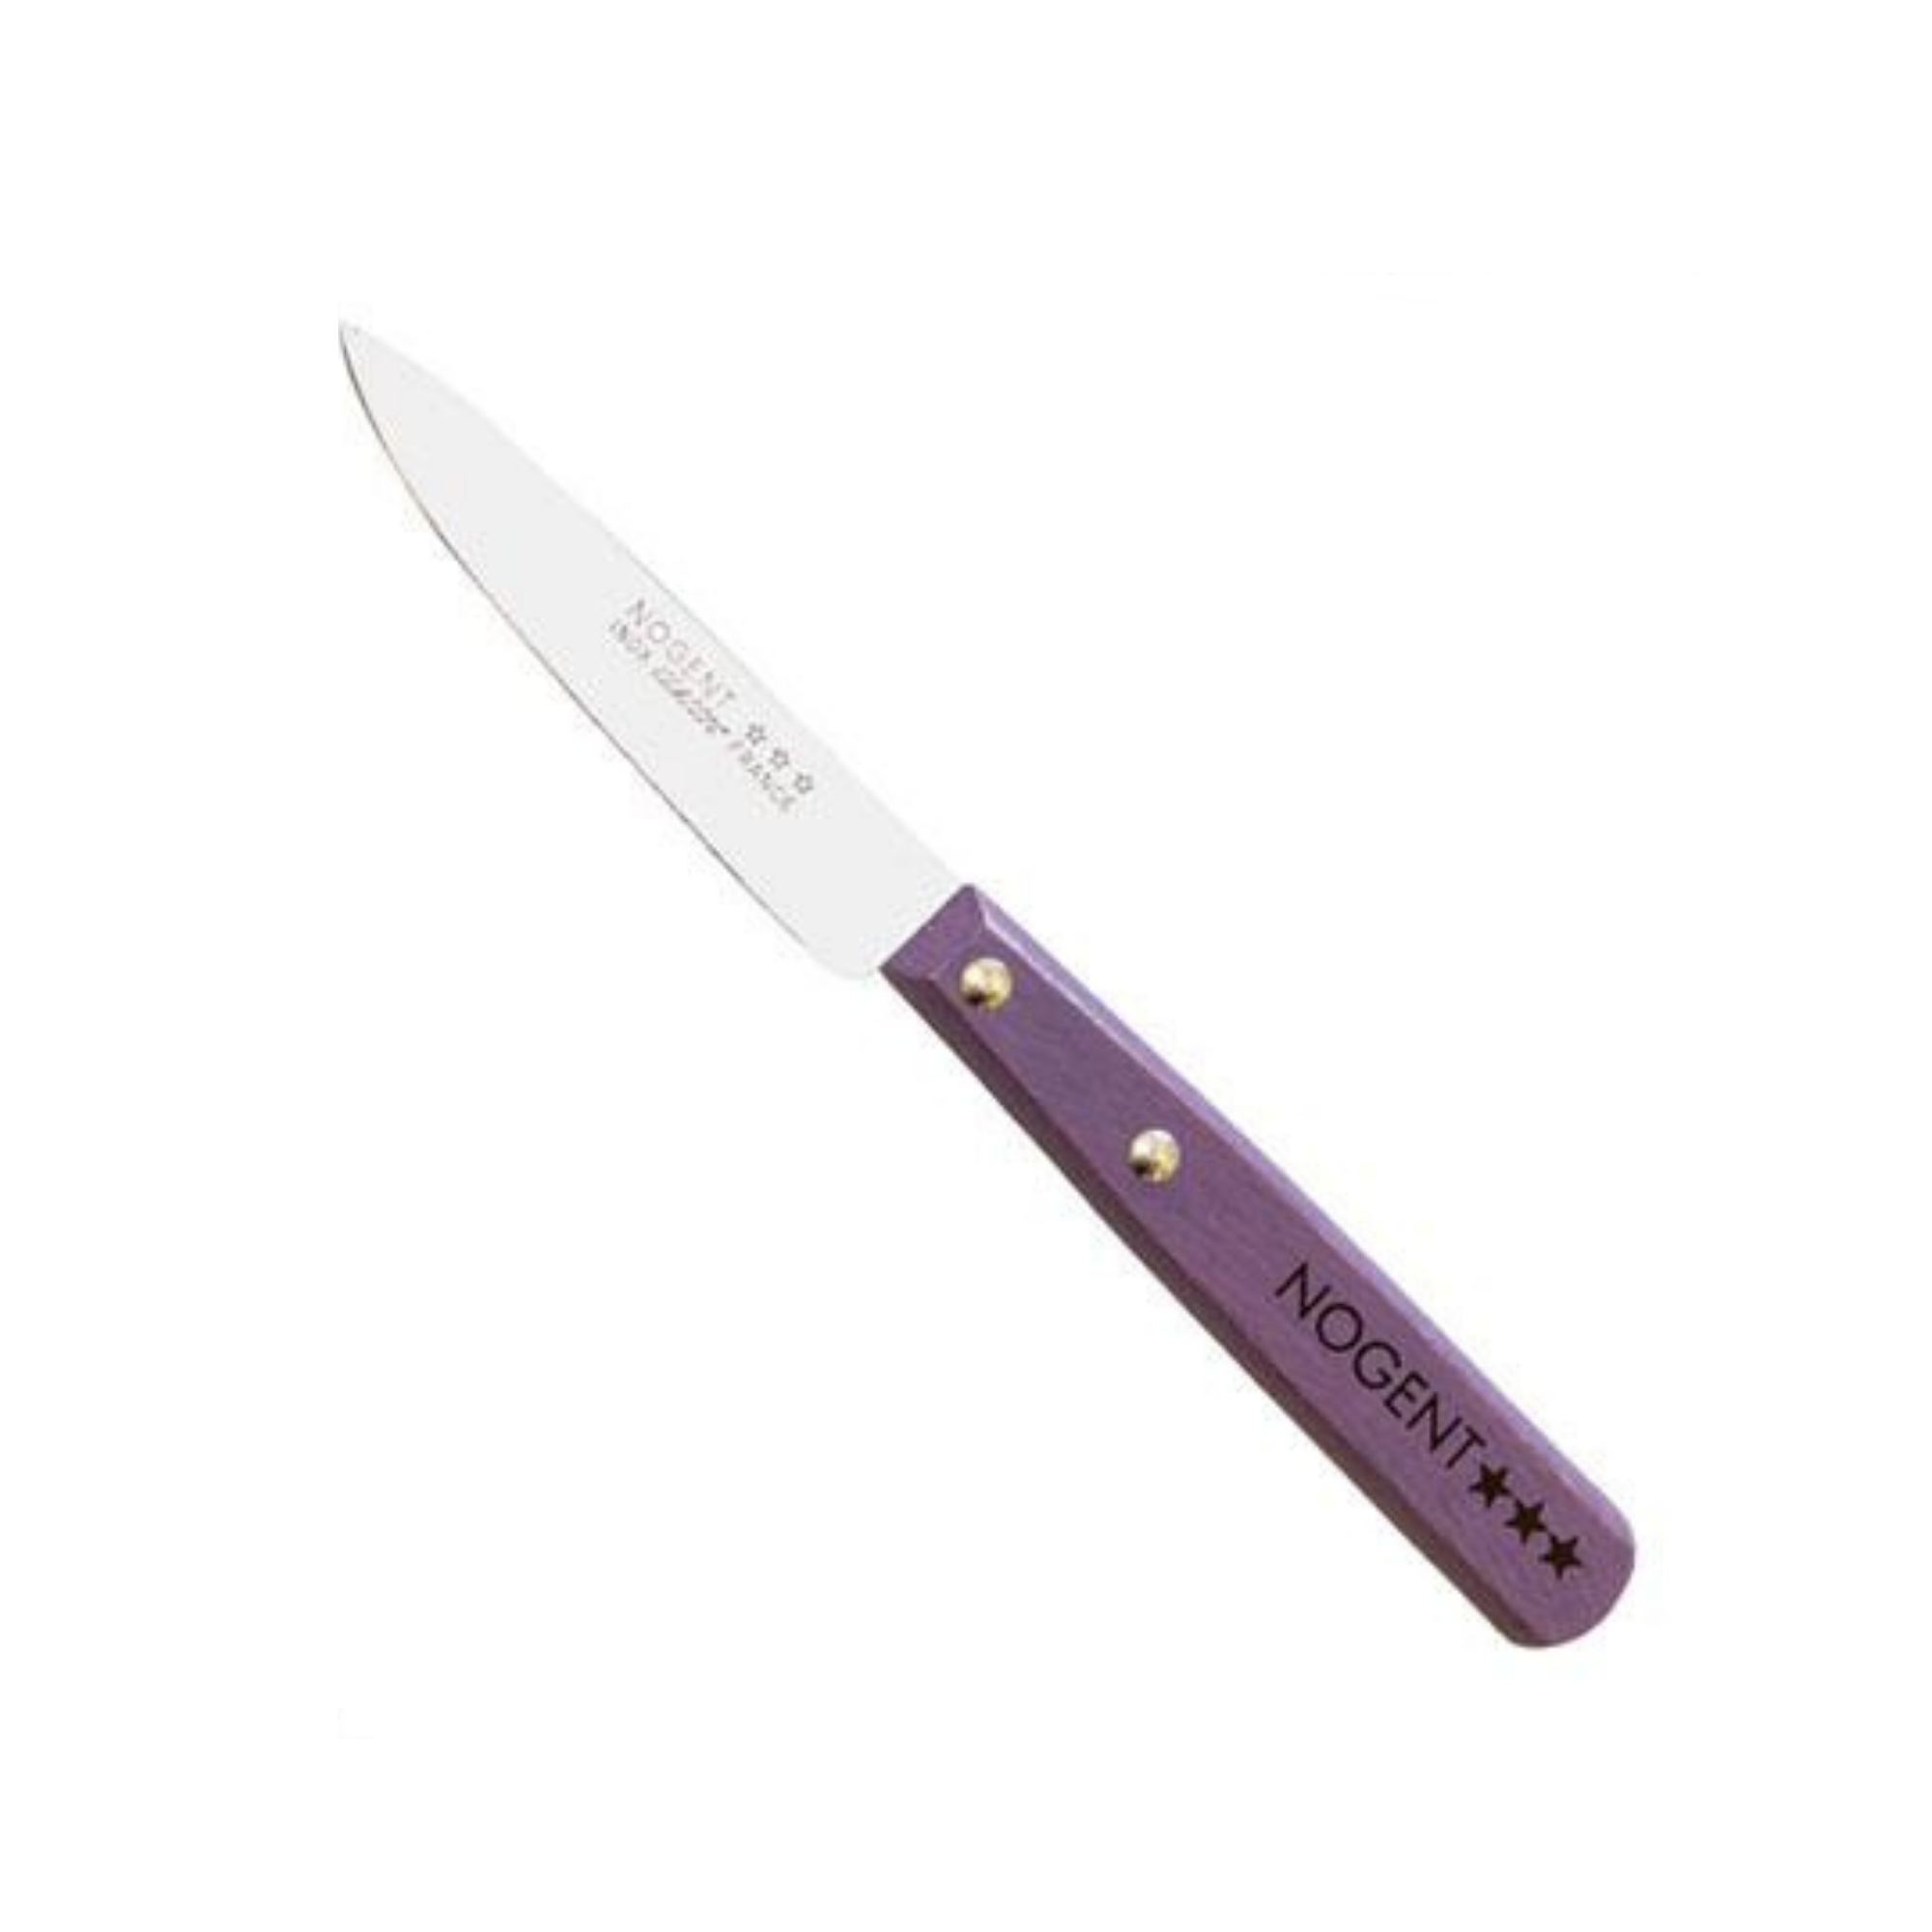 Nogent Canada French Paring knife color Clementine Boutique Canada